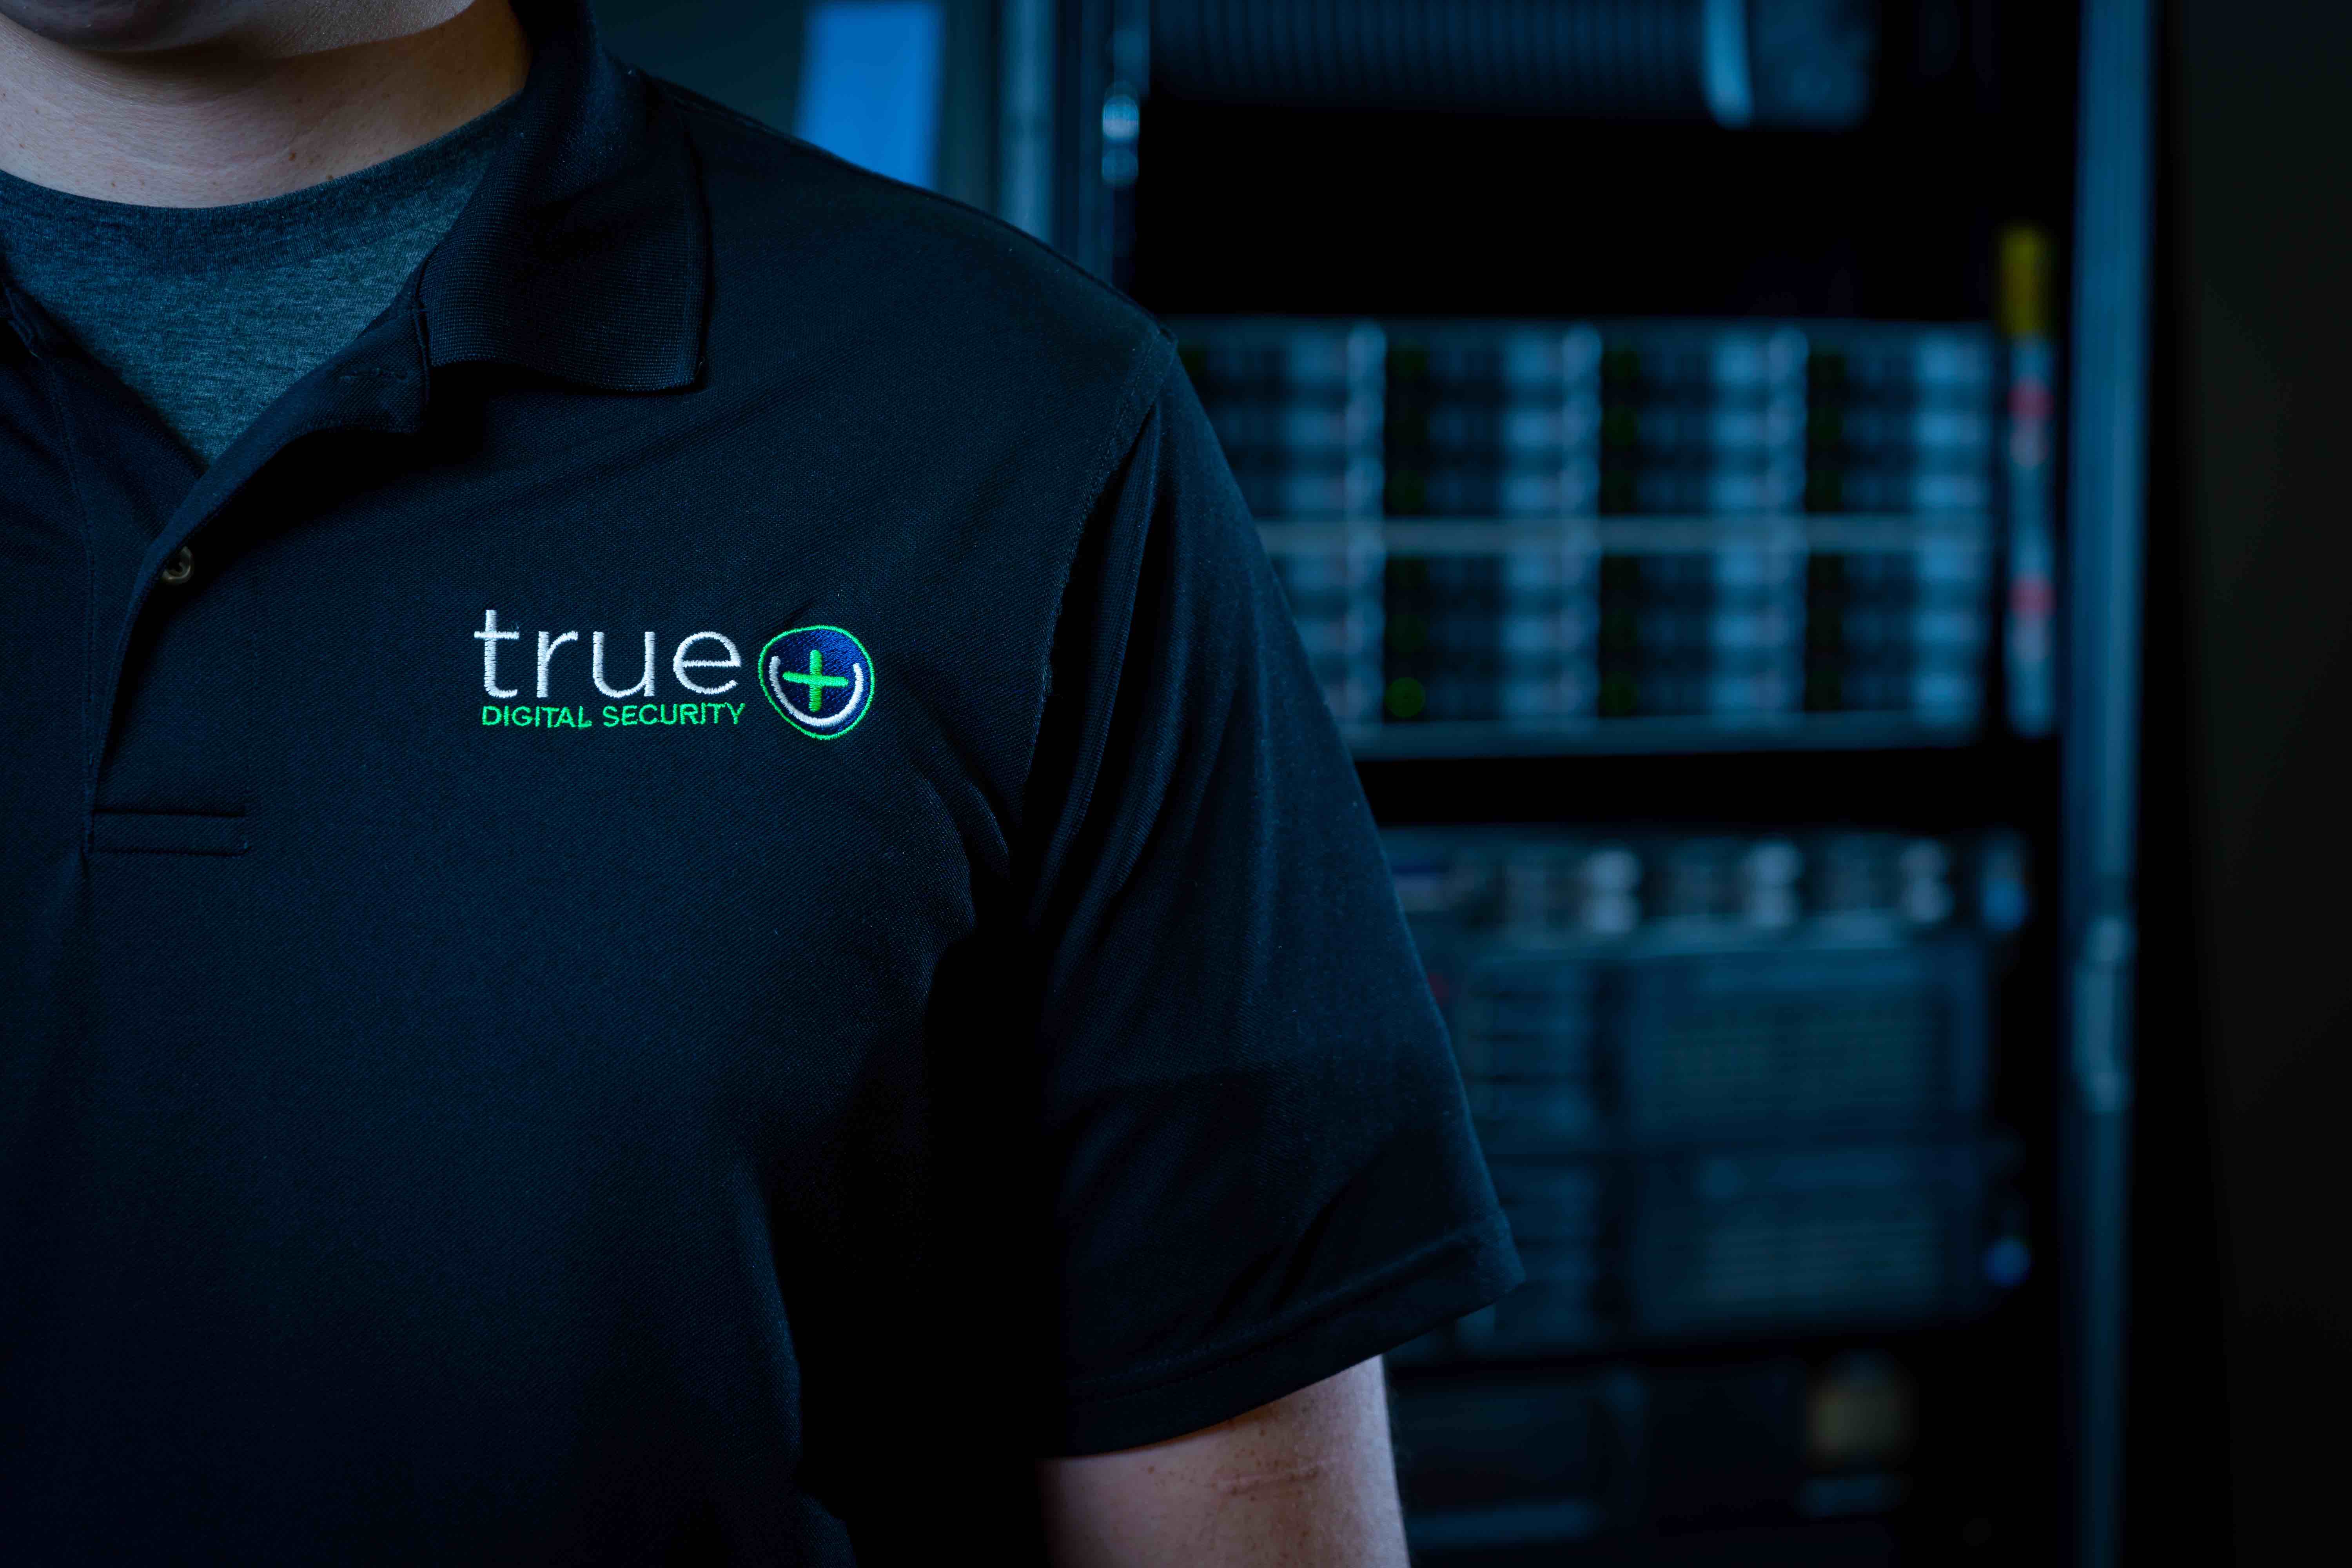 True Shirt and Servers Best SMALLER FILE